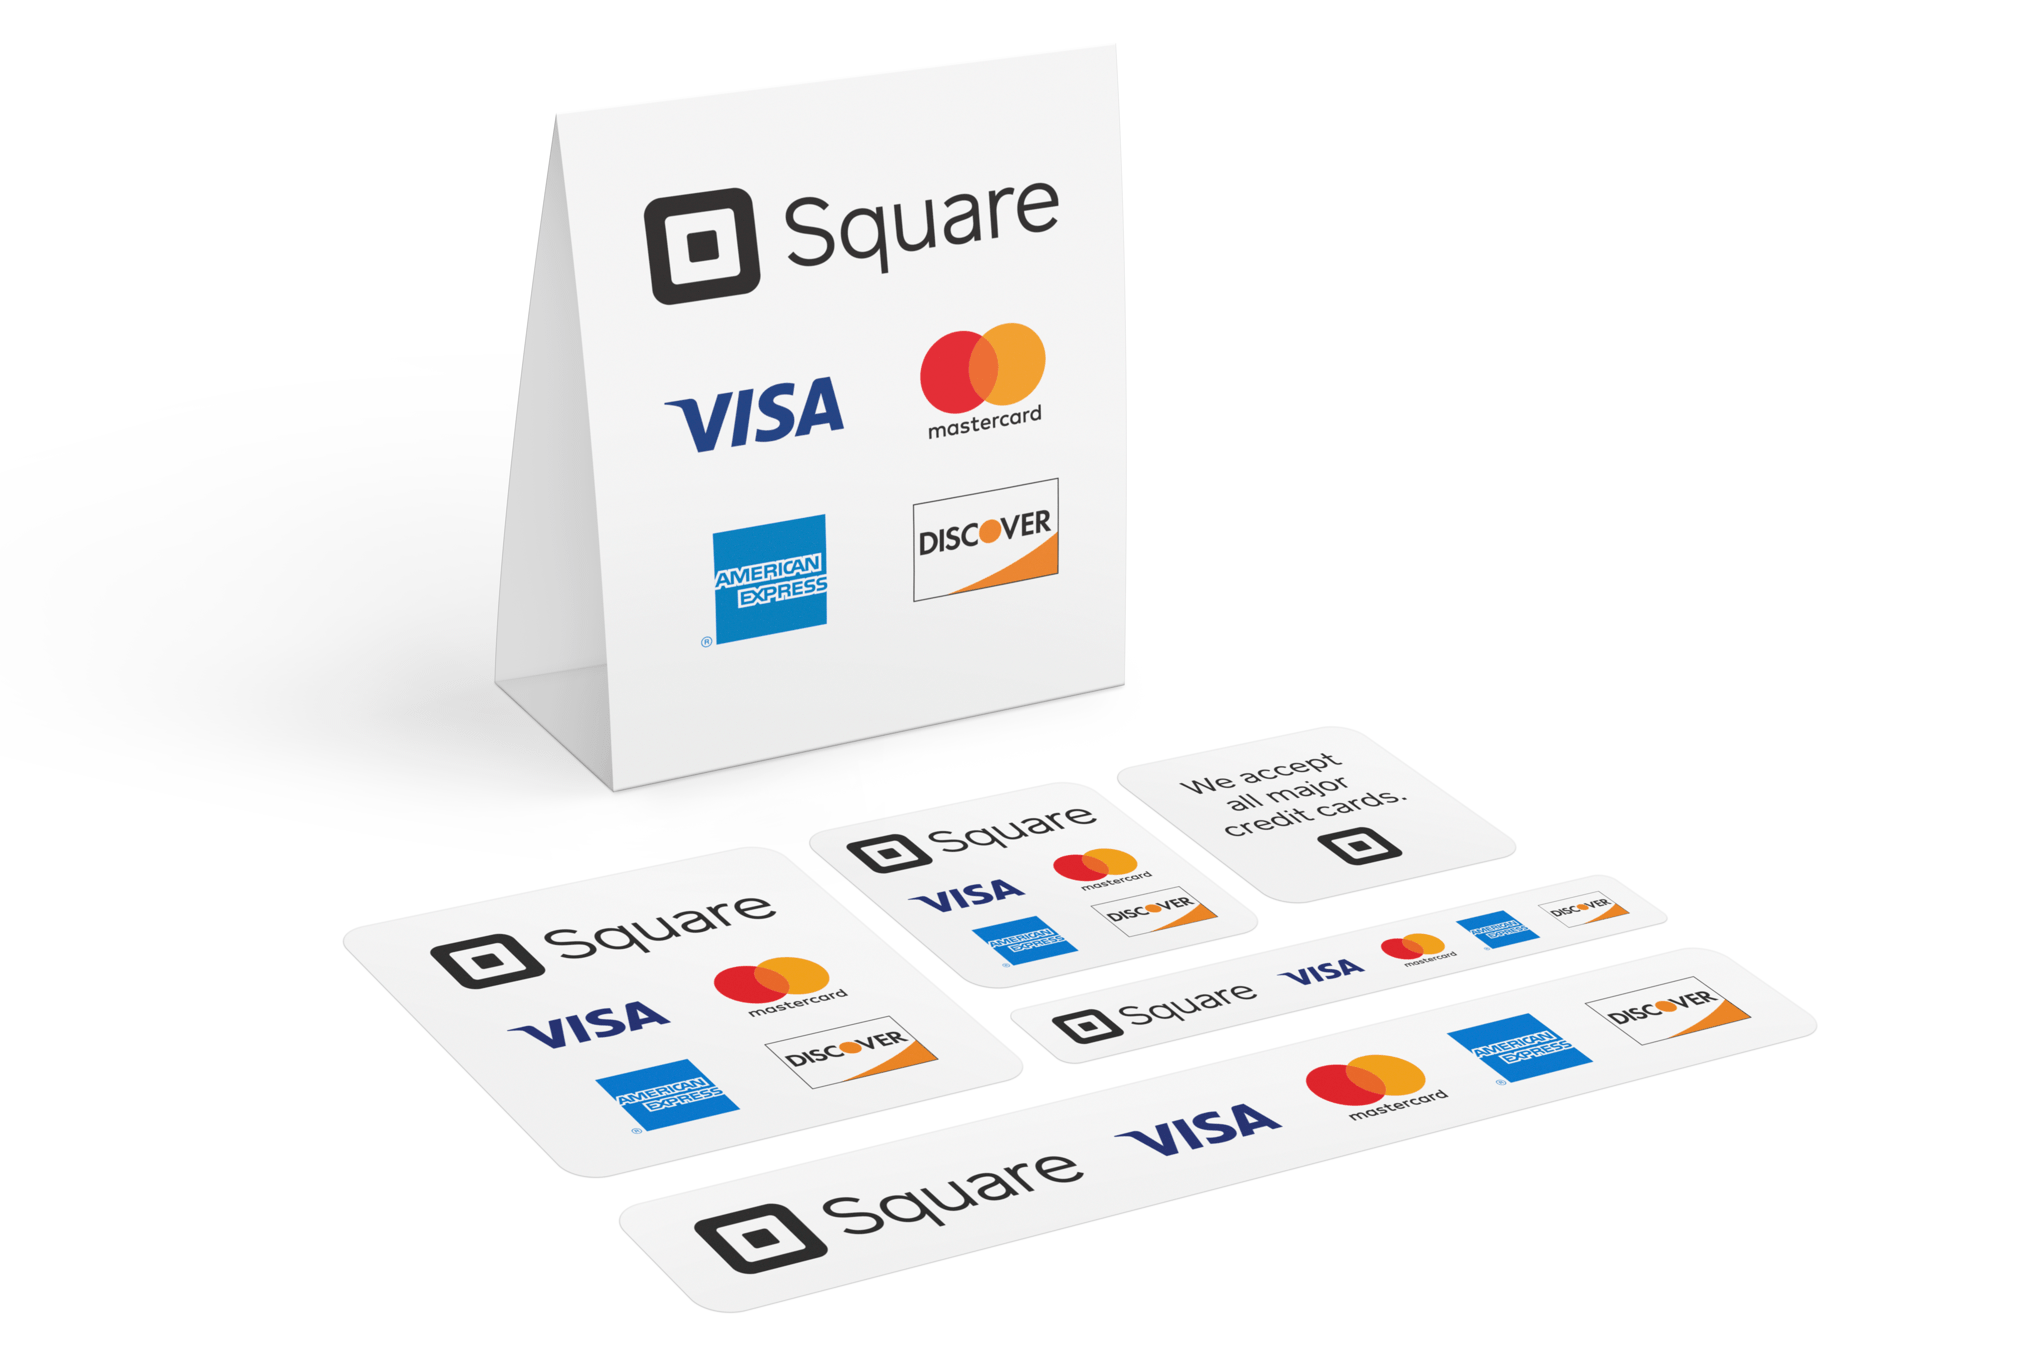 credit card decals signs